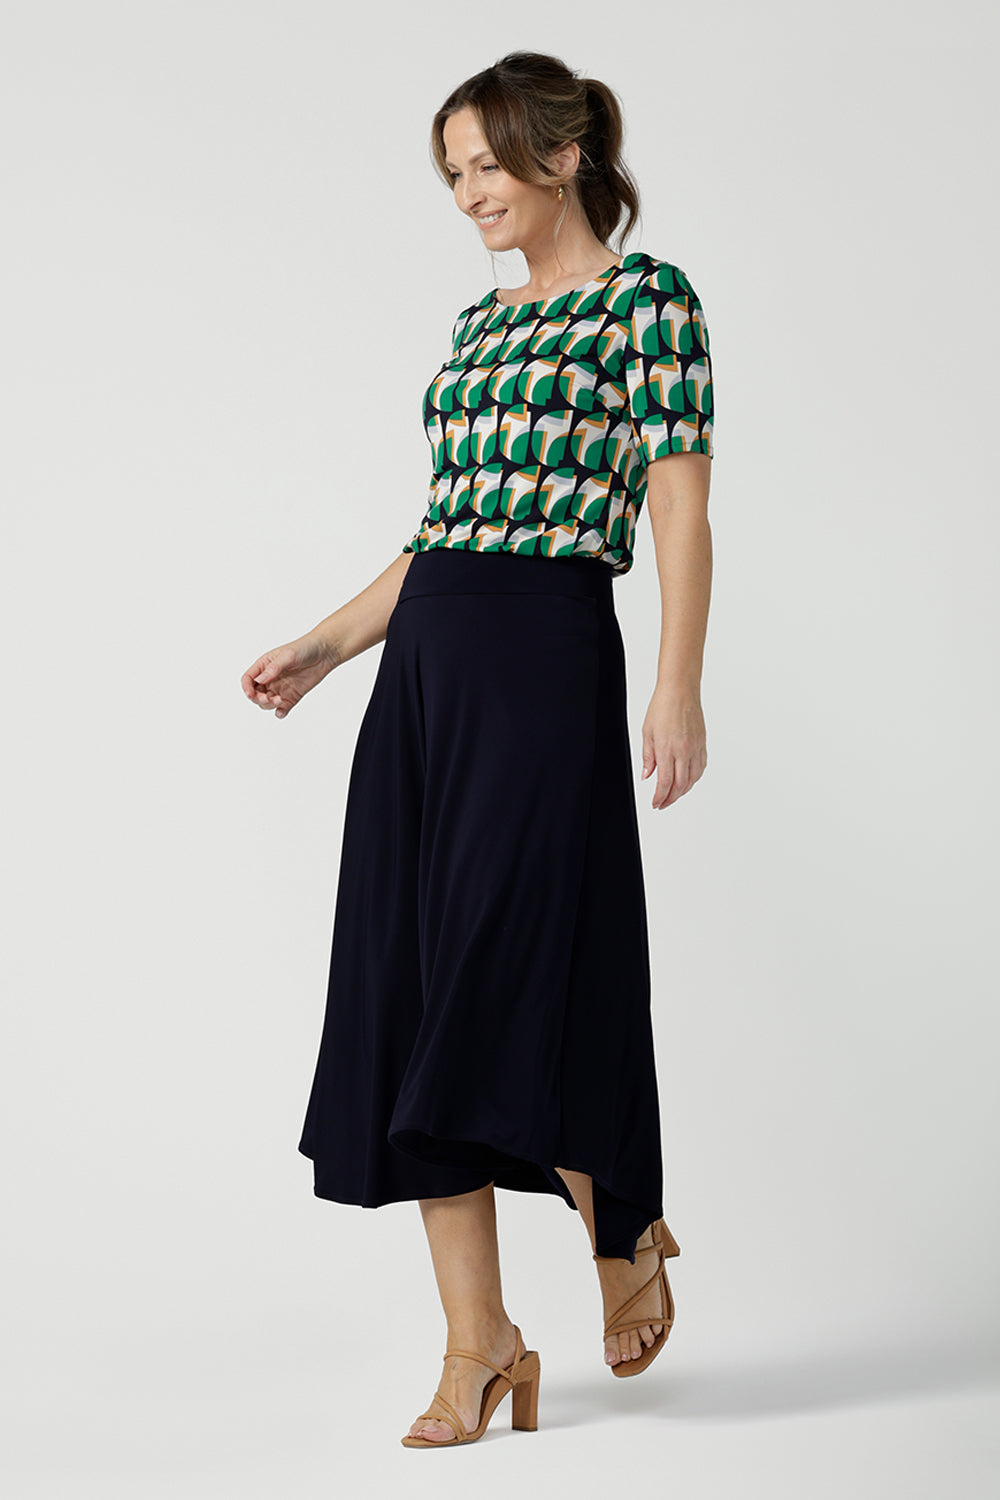  a size 10 woman wearing a boat neck short sleeve jersey top in a geometric print. She wears the top with a navy skirt. Designed and made in Australia for petite to plus size women.